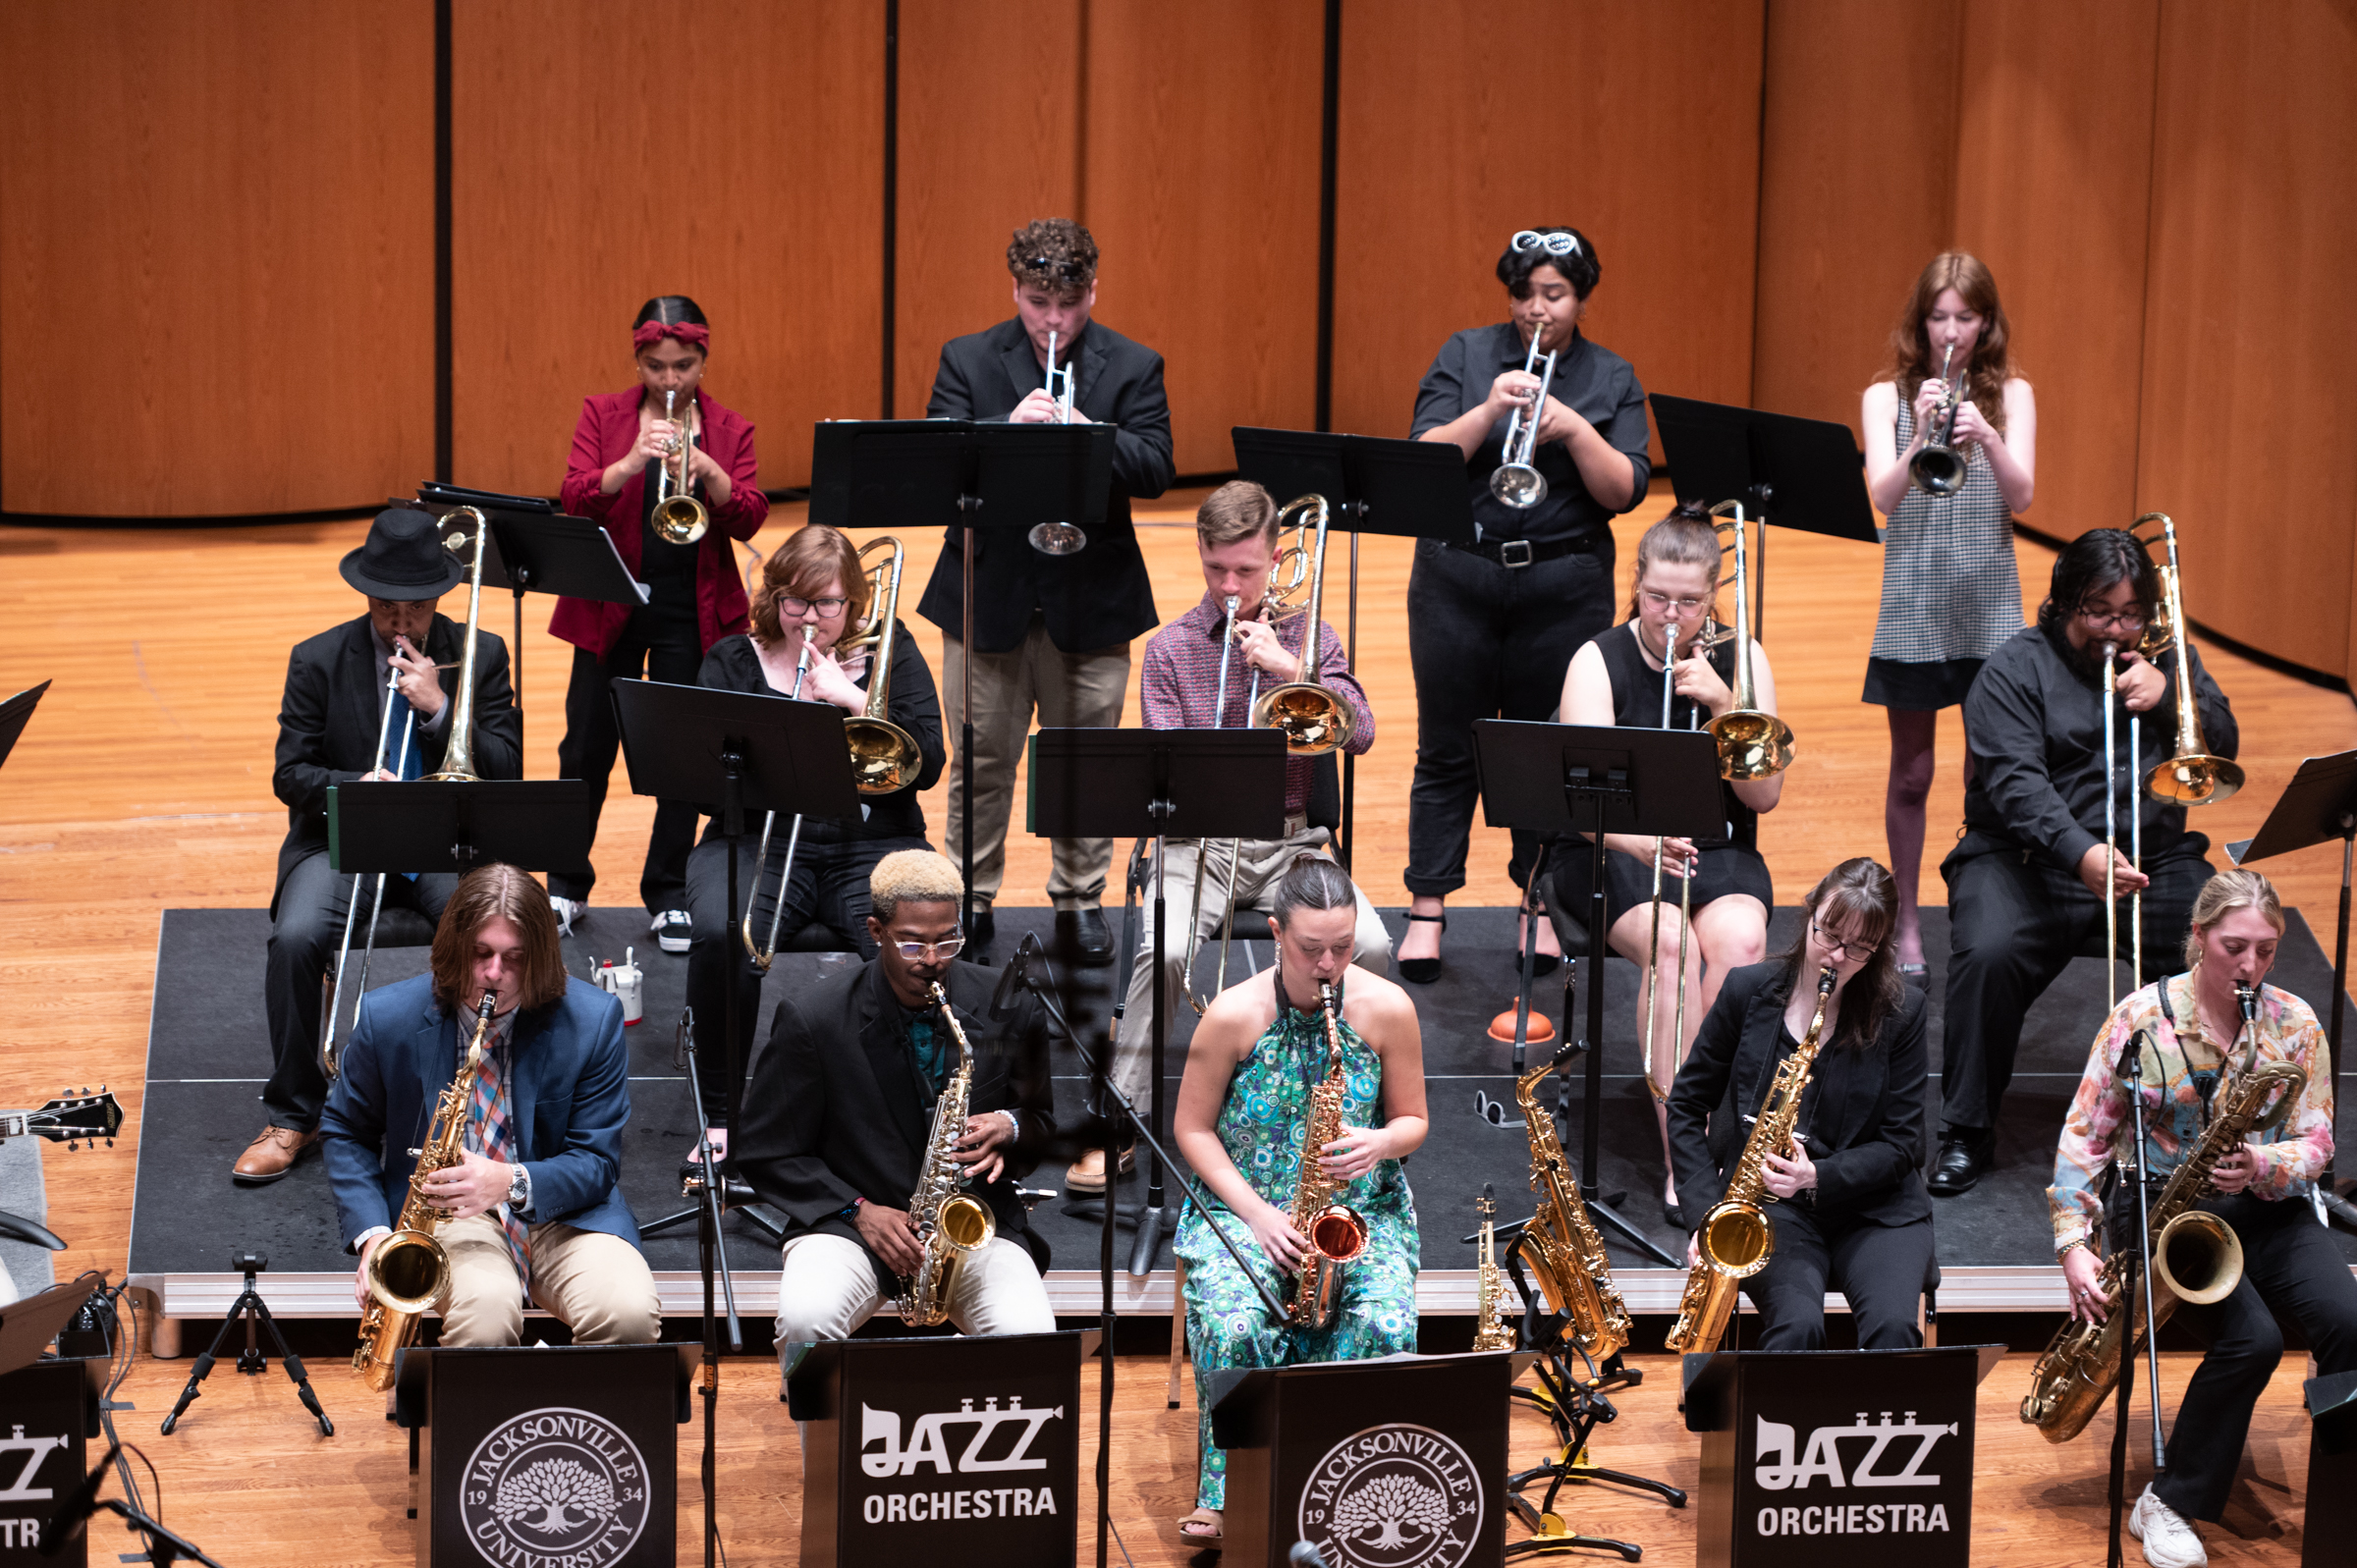 Close up of Jazz students